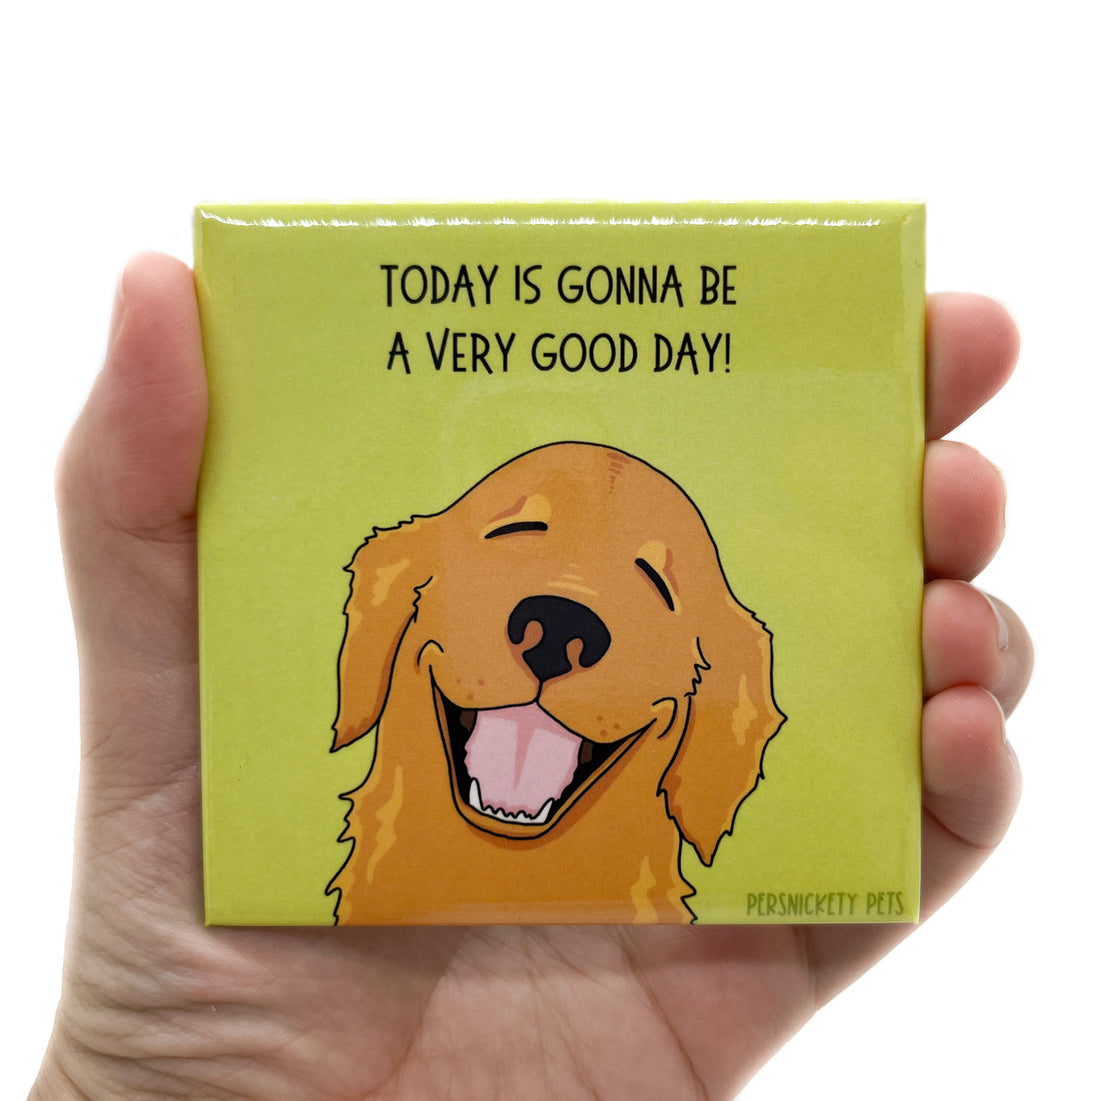 Persnickety Pets: A Very Good Day fridge magnet in hand